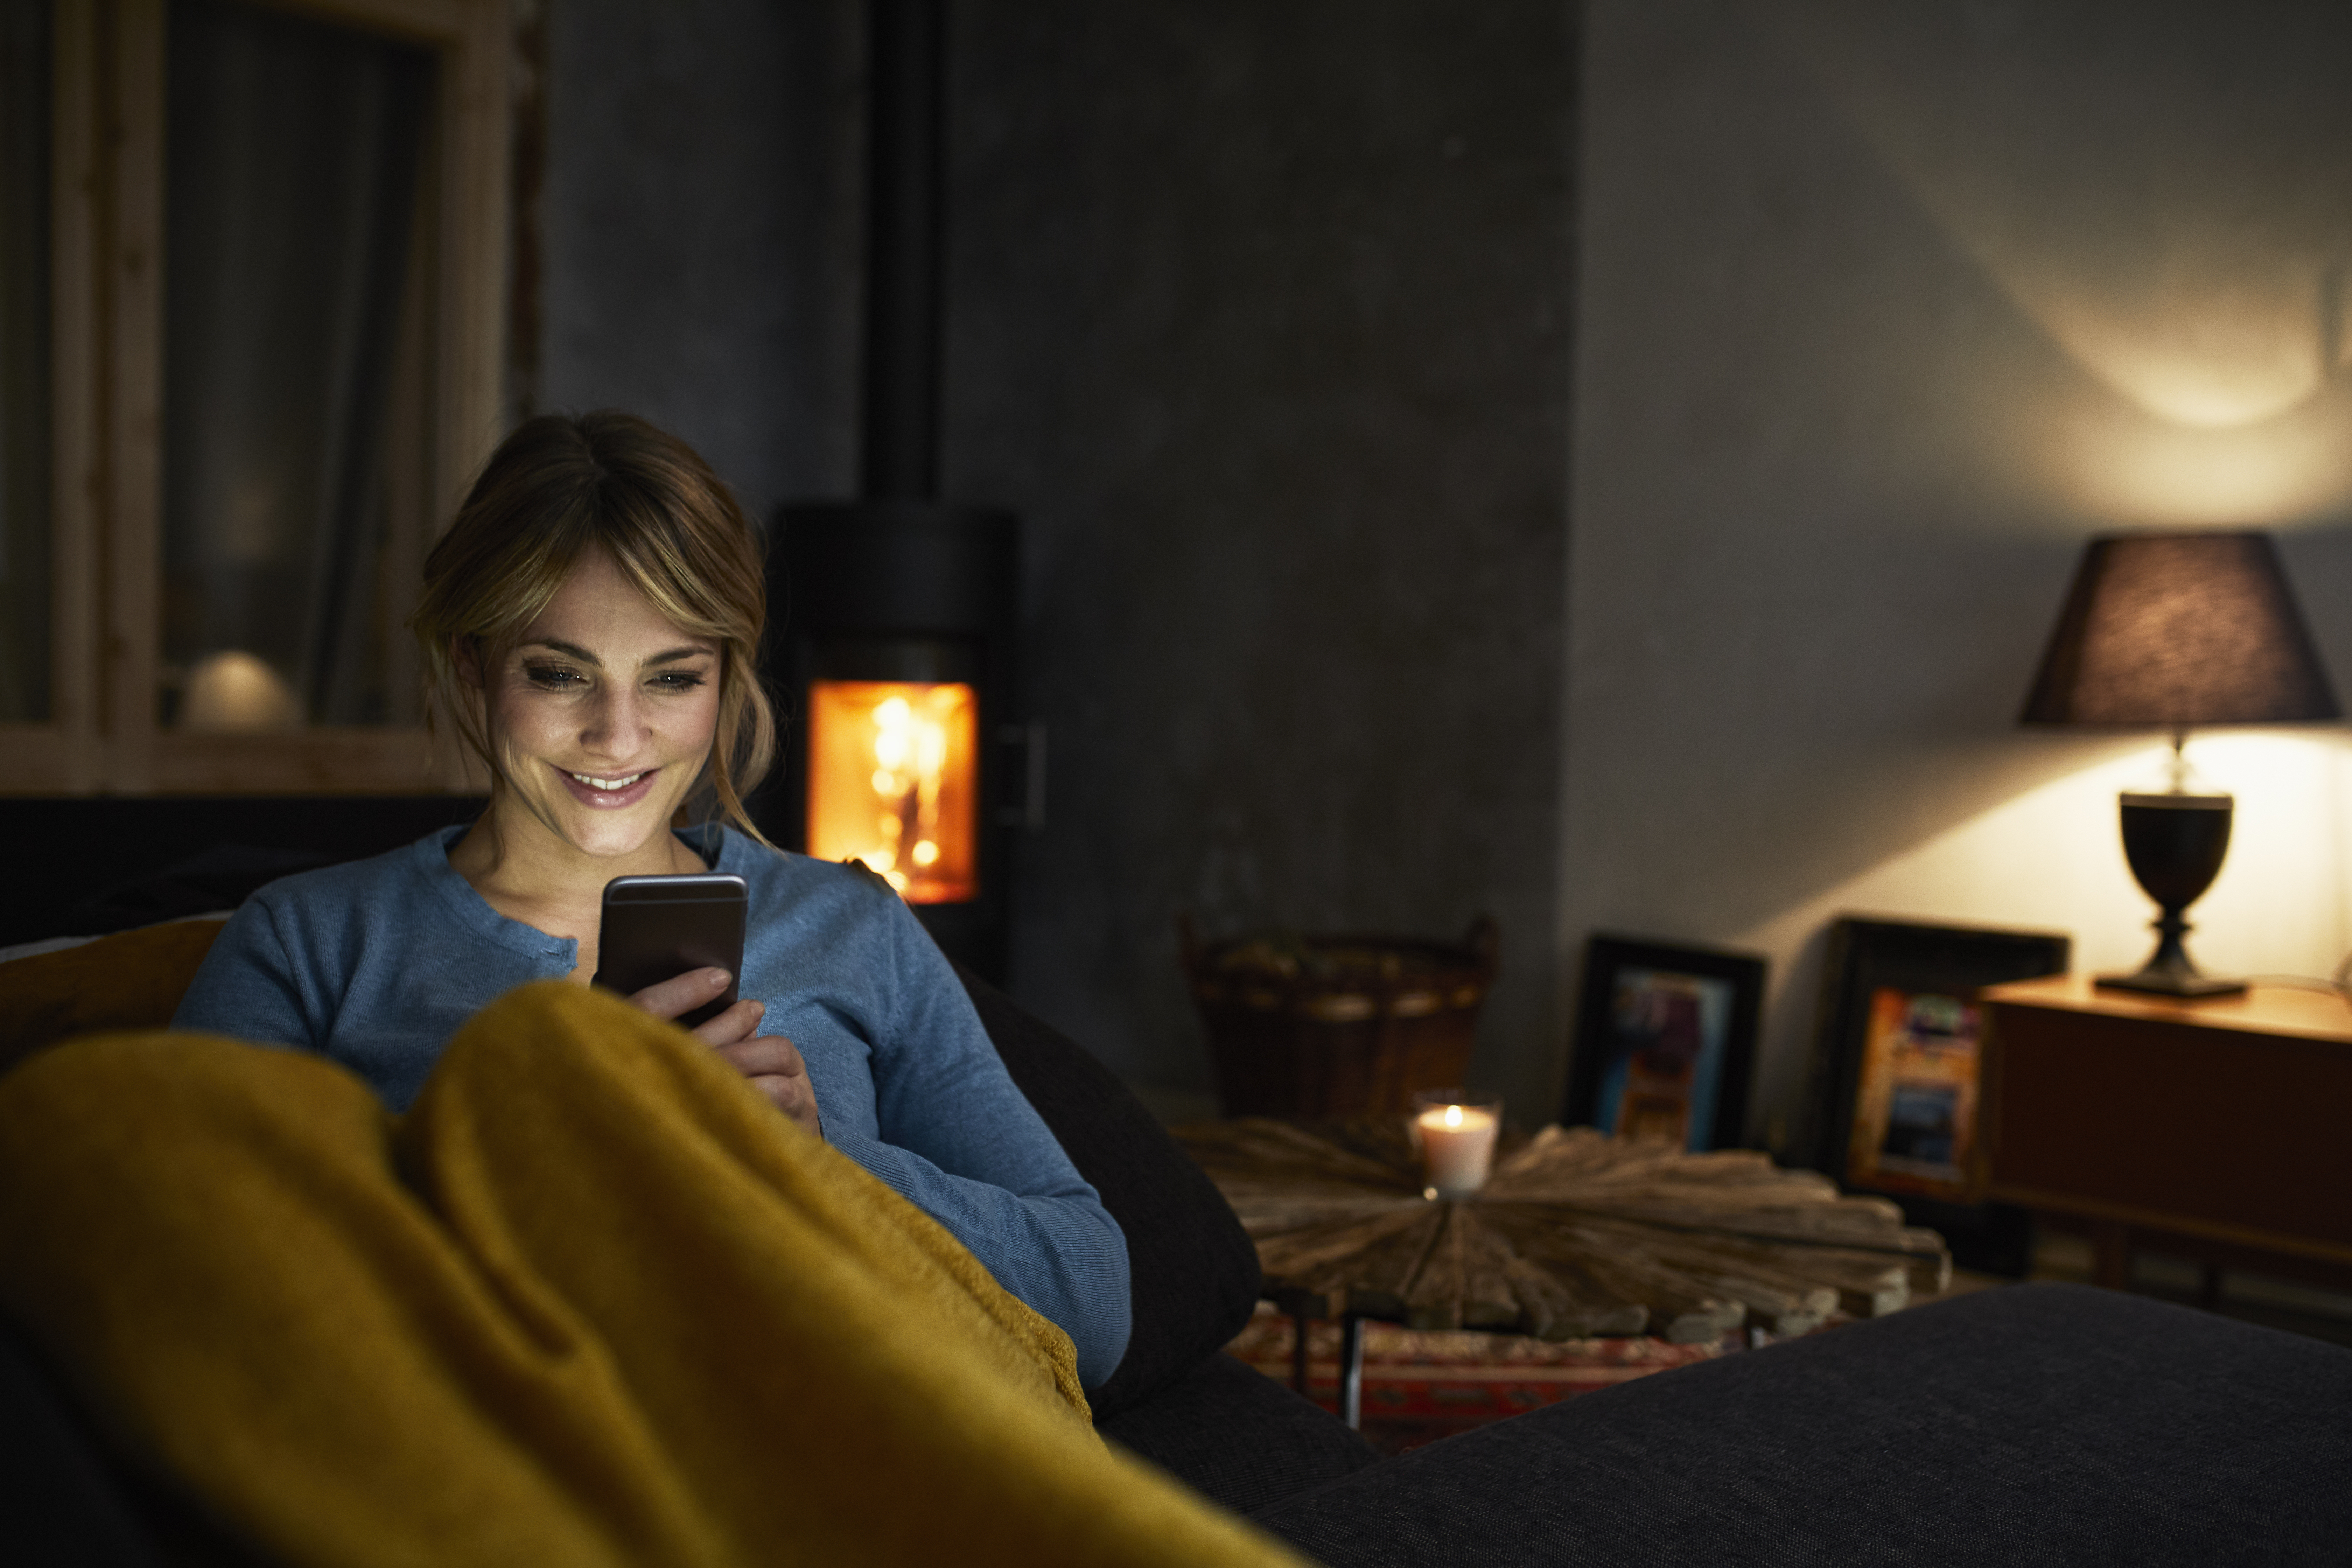 Women at home on couch with blanket in dim lighting